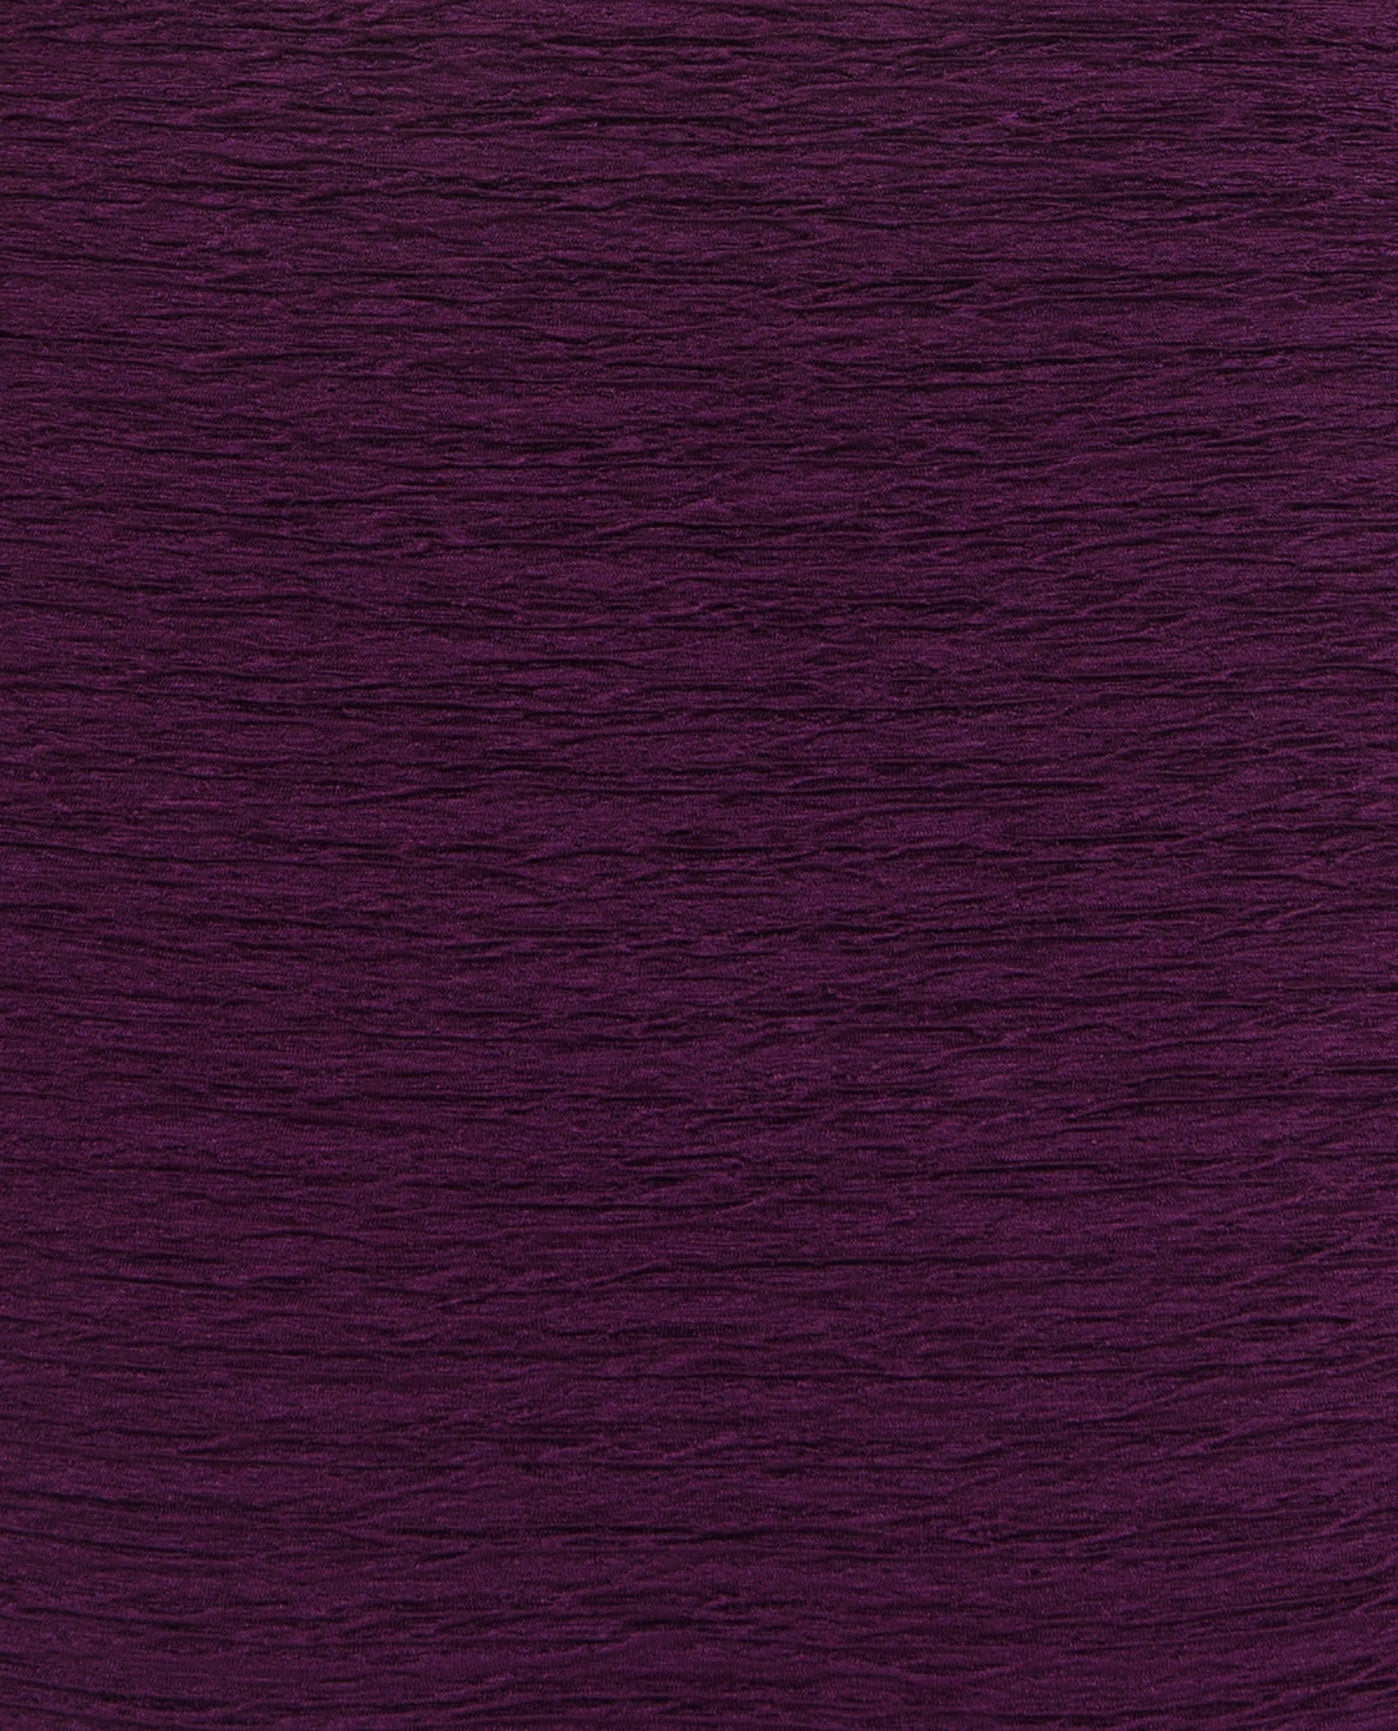 FABRIC SWATCH VIEW OF CHLORINE RESISTANT KRINKLE TEXTURED SOLID TWIST FRONT PLUS SIZE ONE PIECE | KRINKLE EGGPLANT